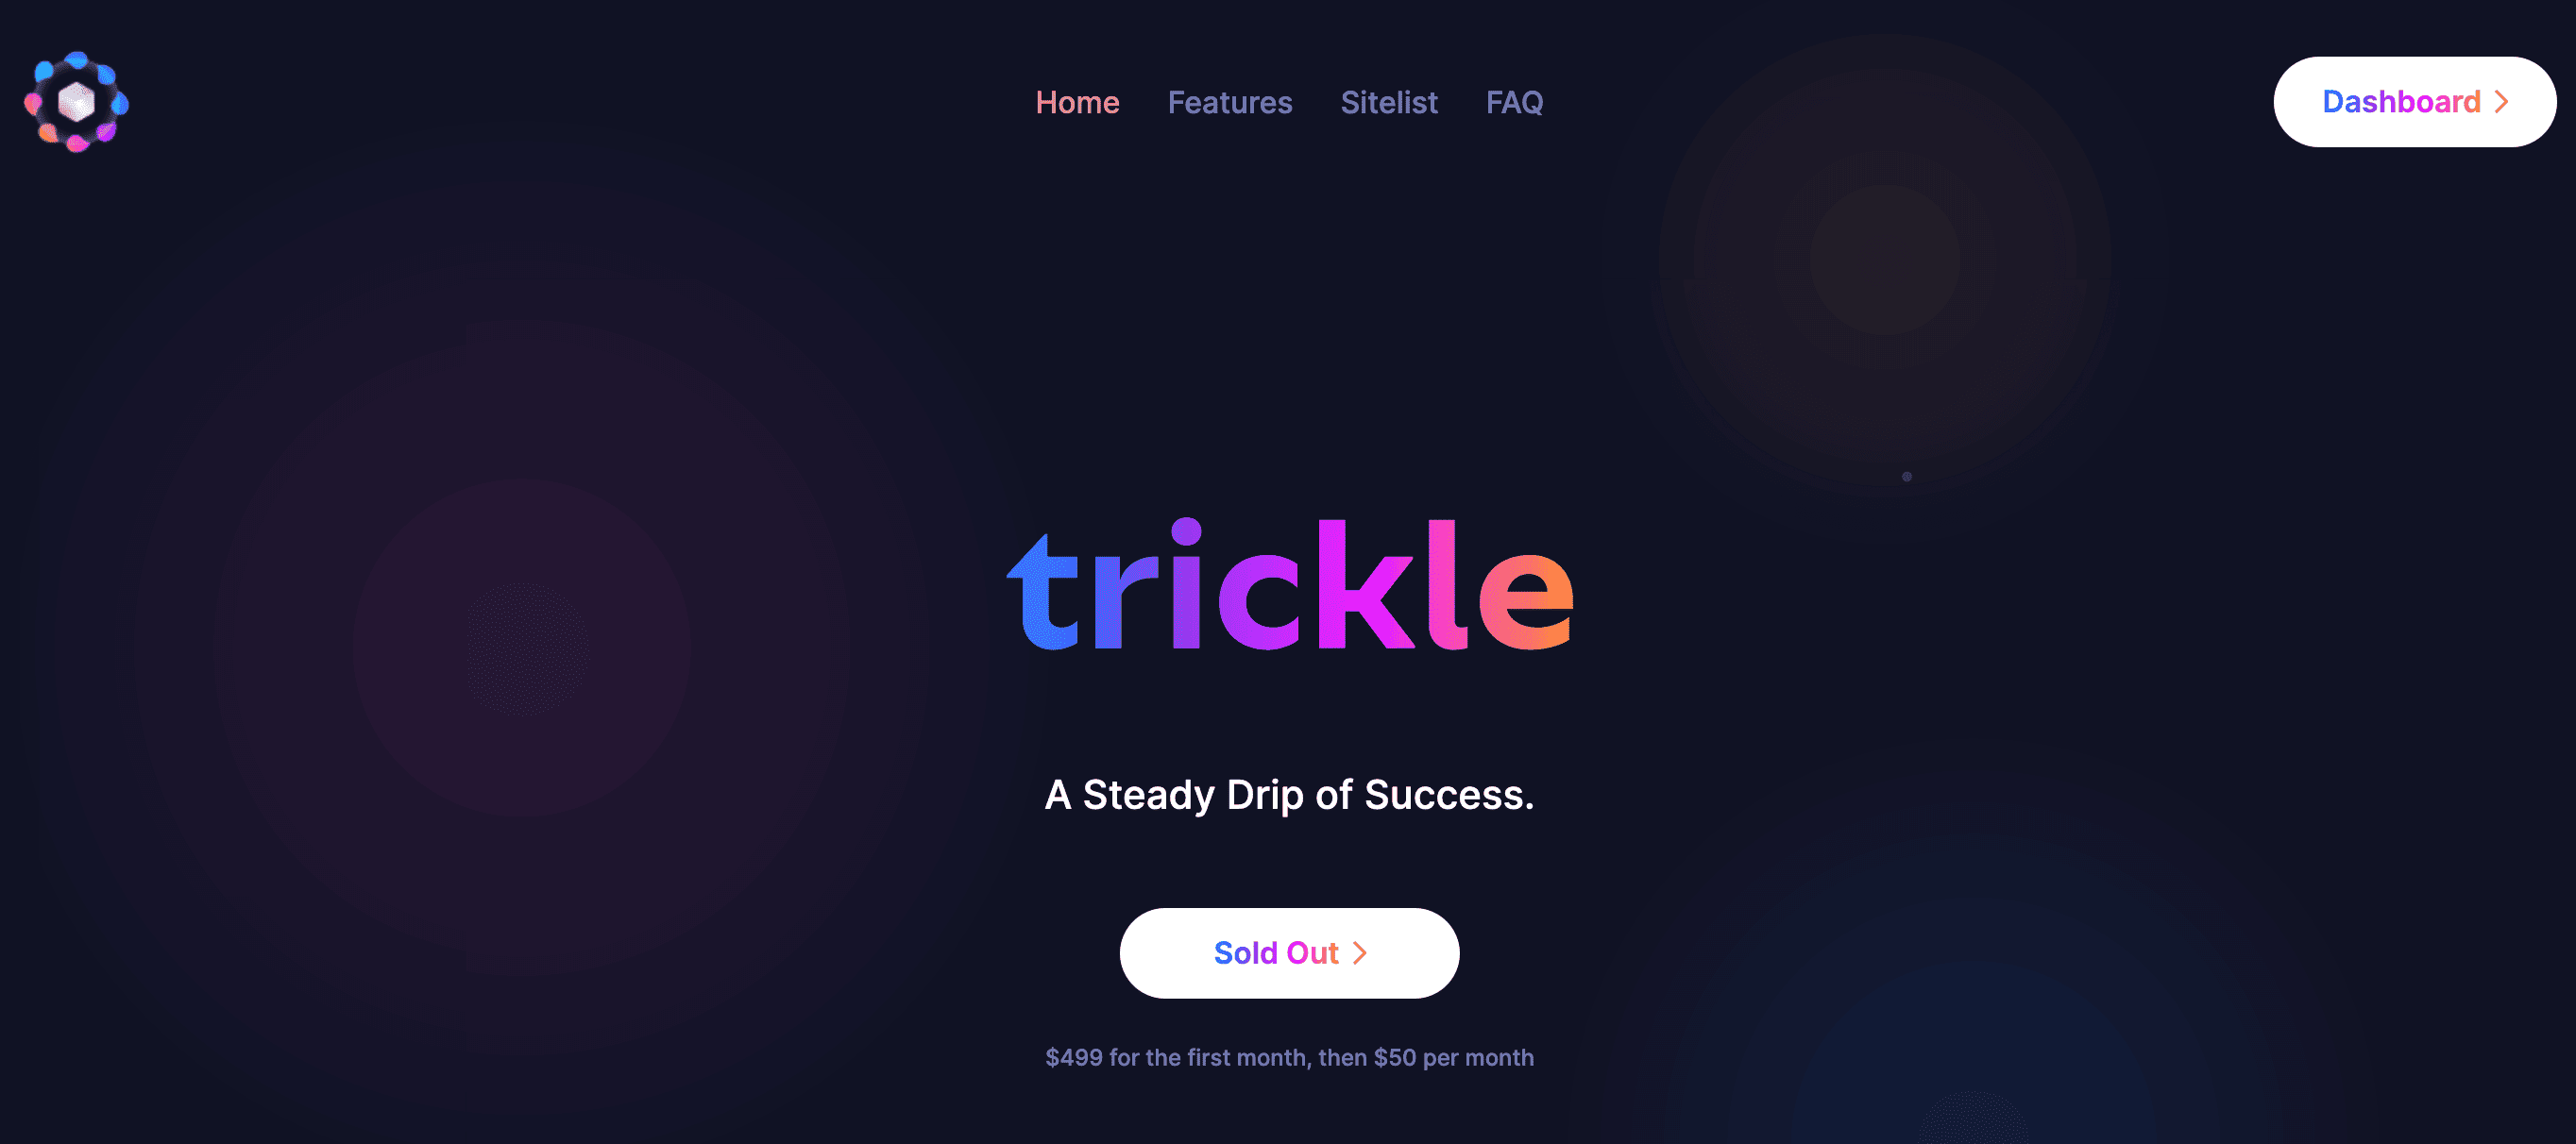 trickle bot's homepage